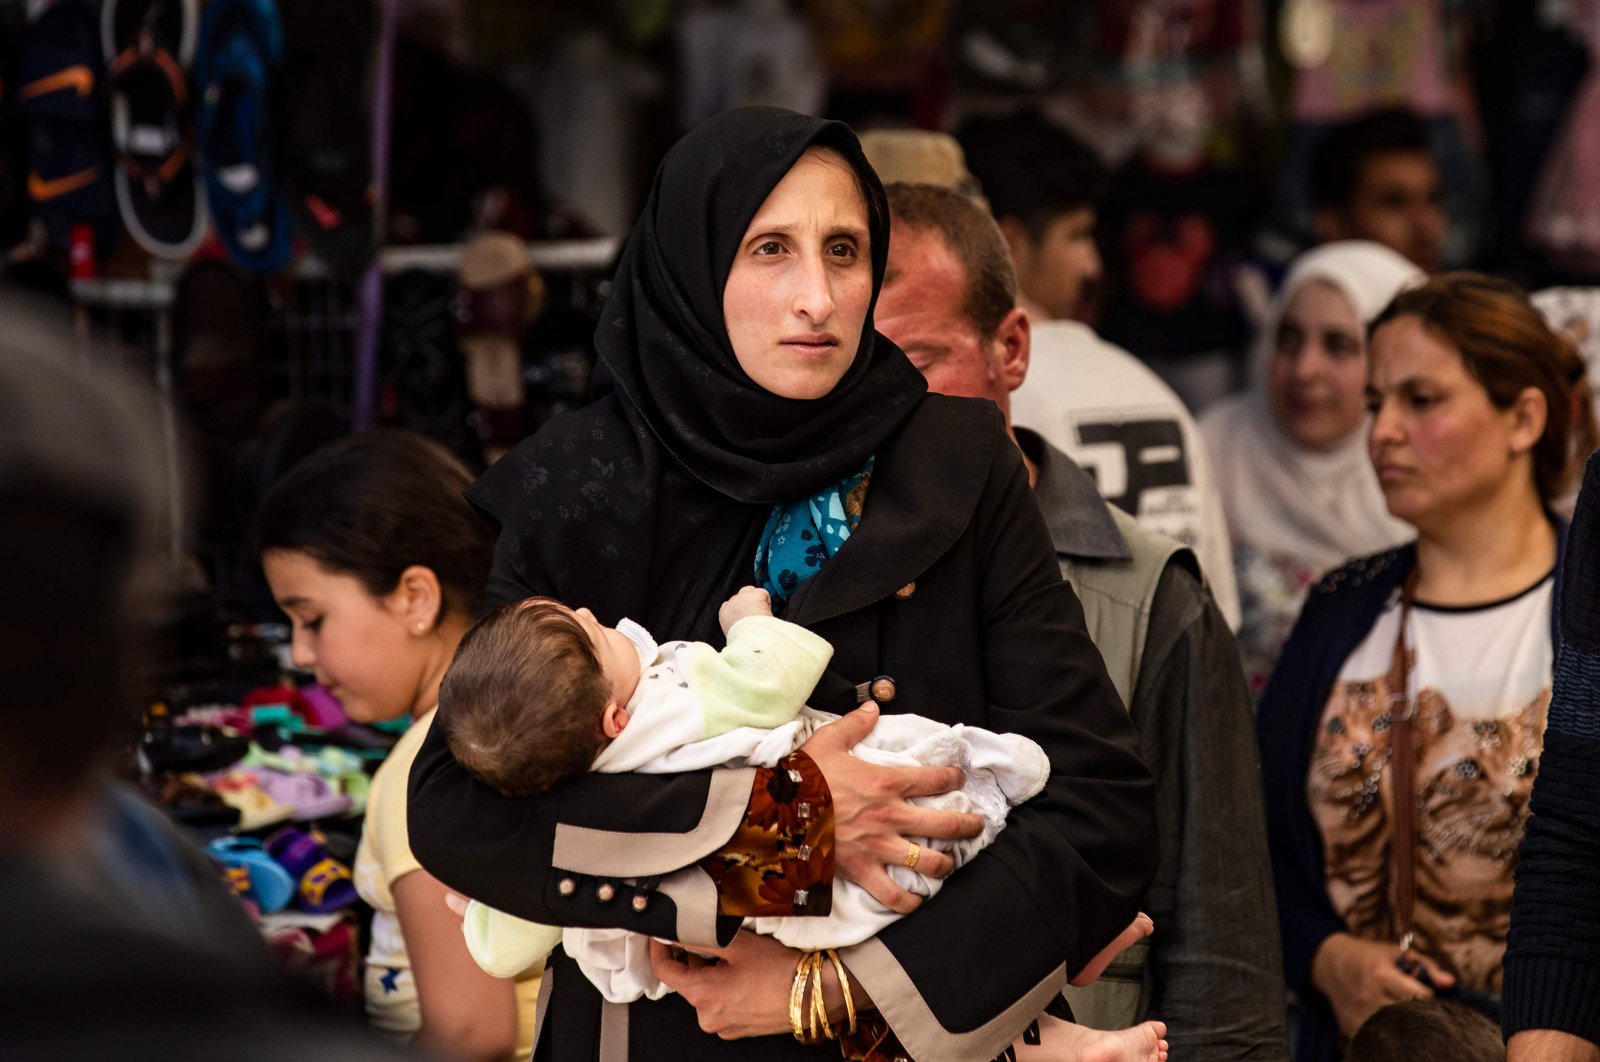 A woman walks with a baby at the main market of the city of Qamishli in Syria's northeastern Hasakah province, May 12, 2020. (AFP Photo)